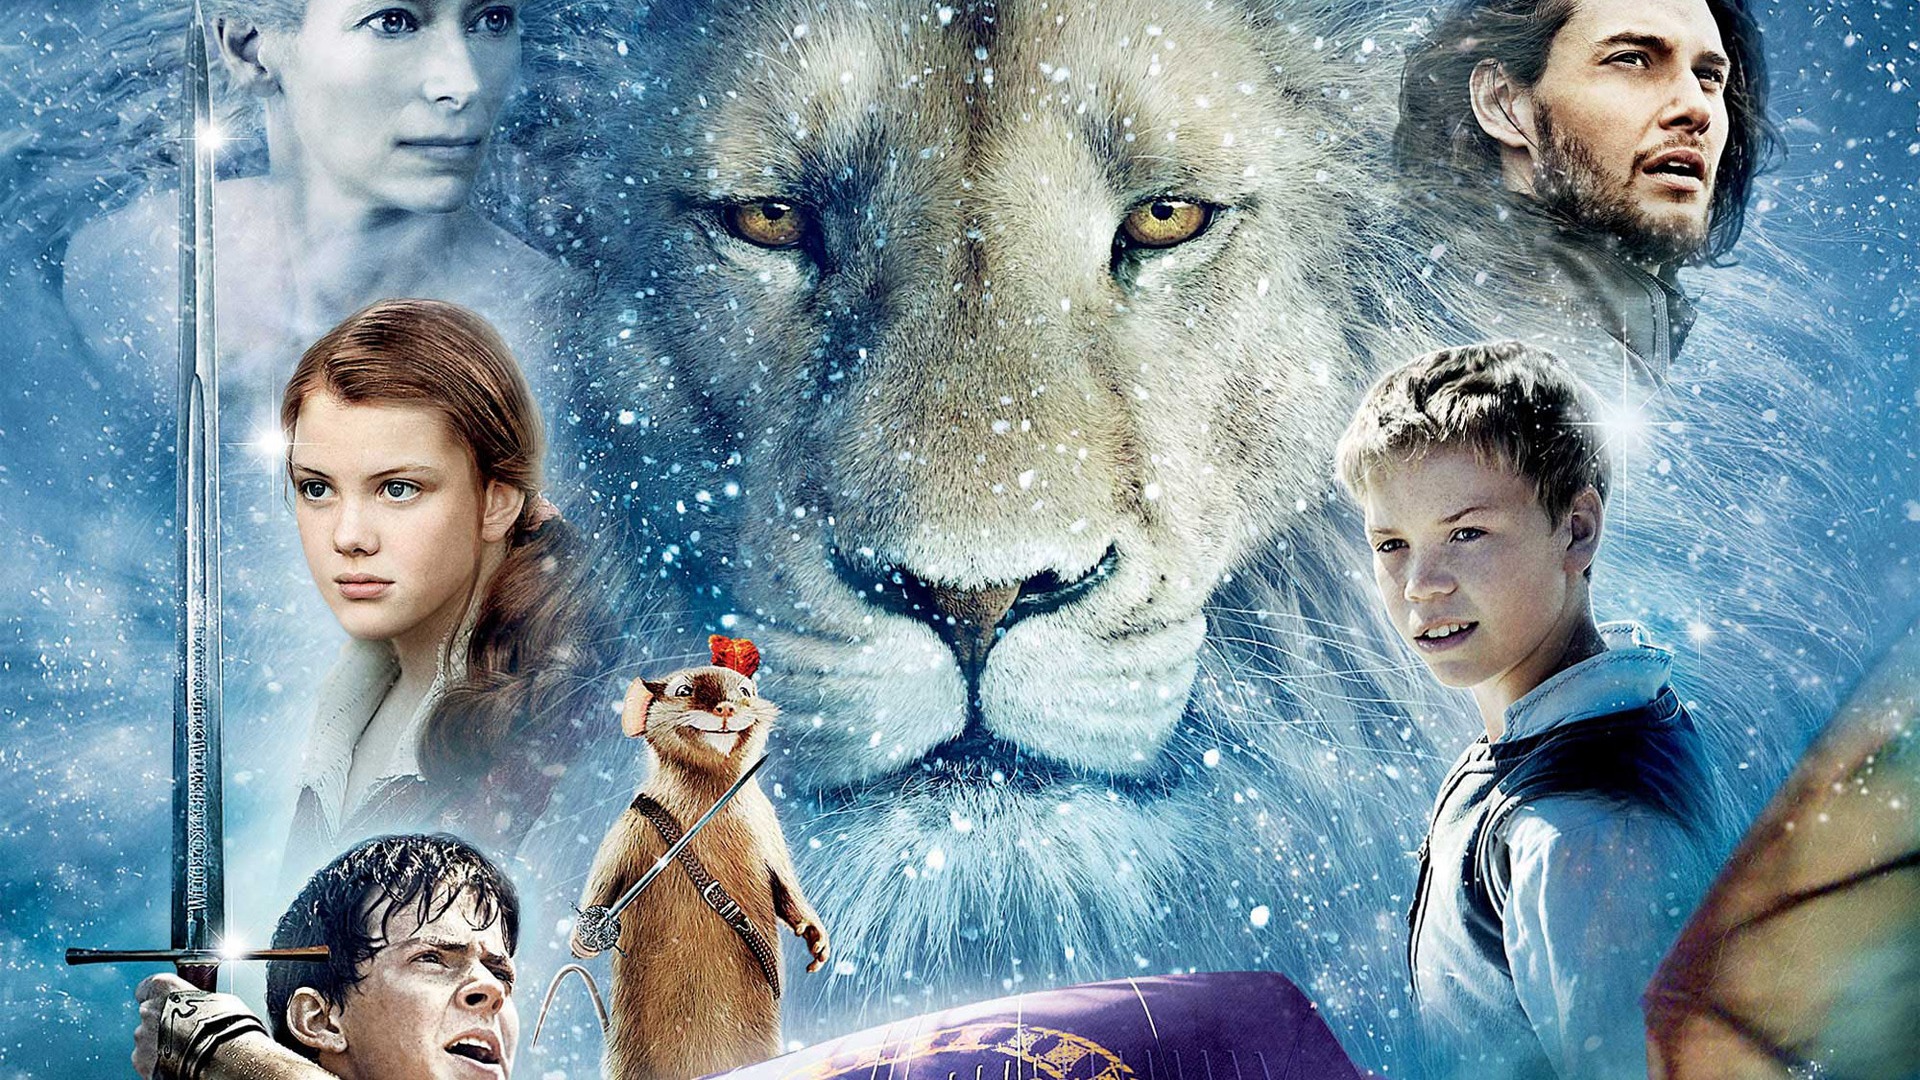 The Chronicles of Narnia: The Voyage of the Dawn Treader wallpapers #2 - 1920x1080